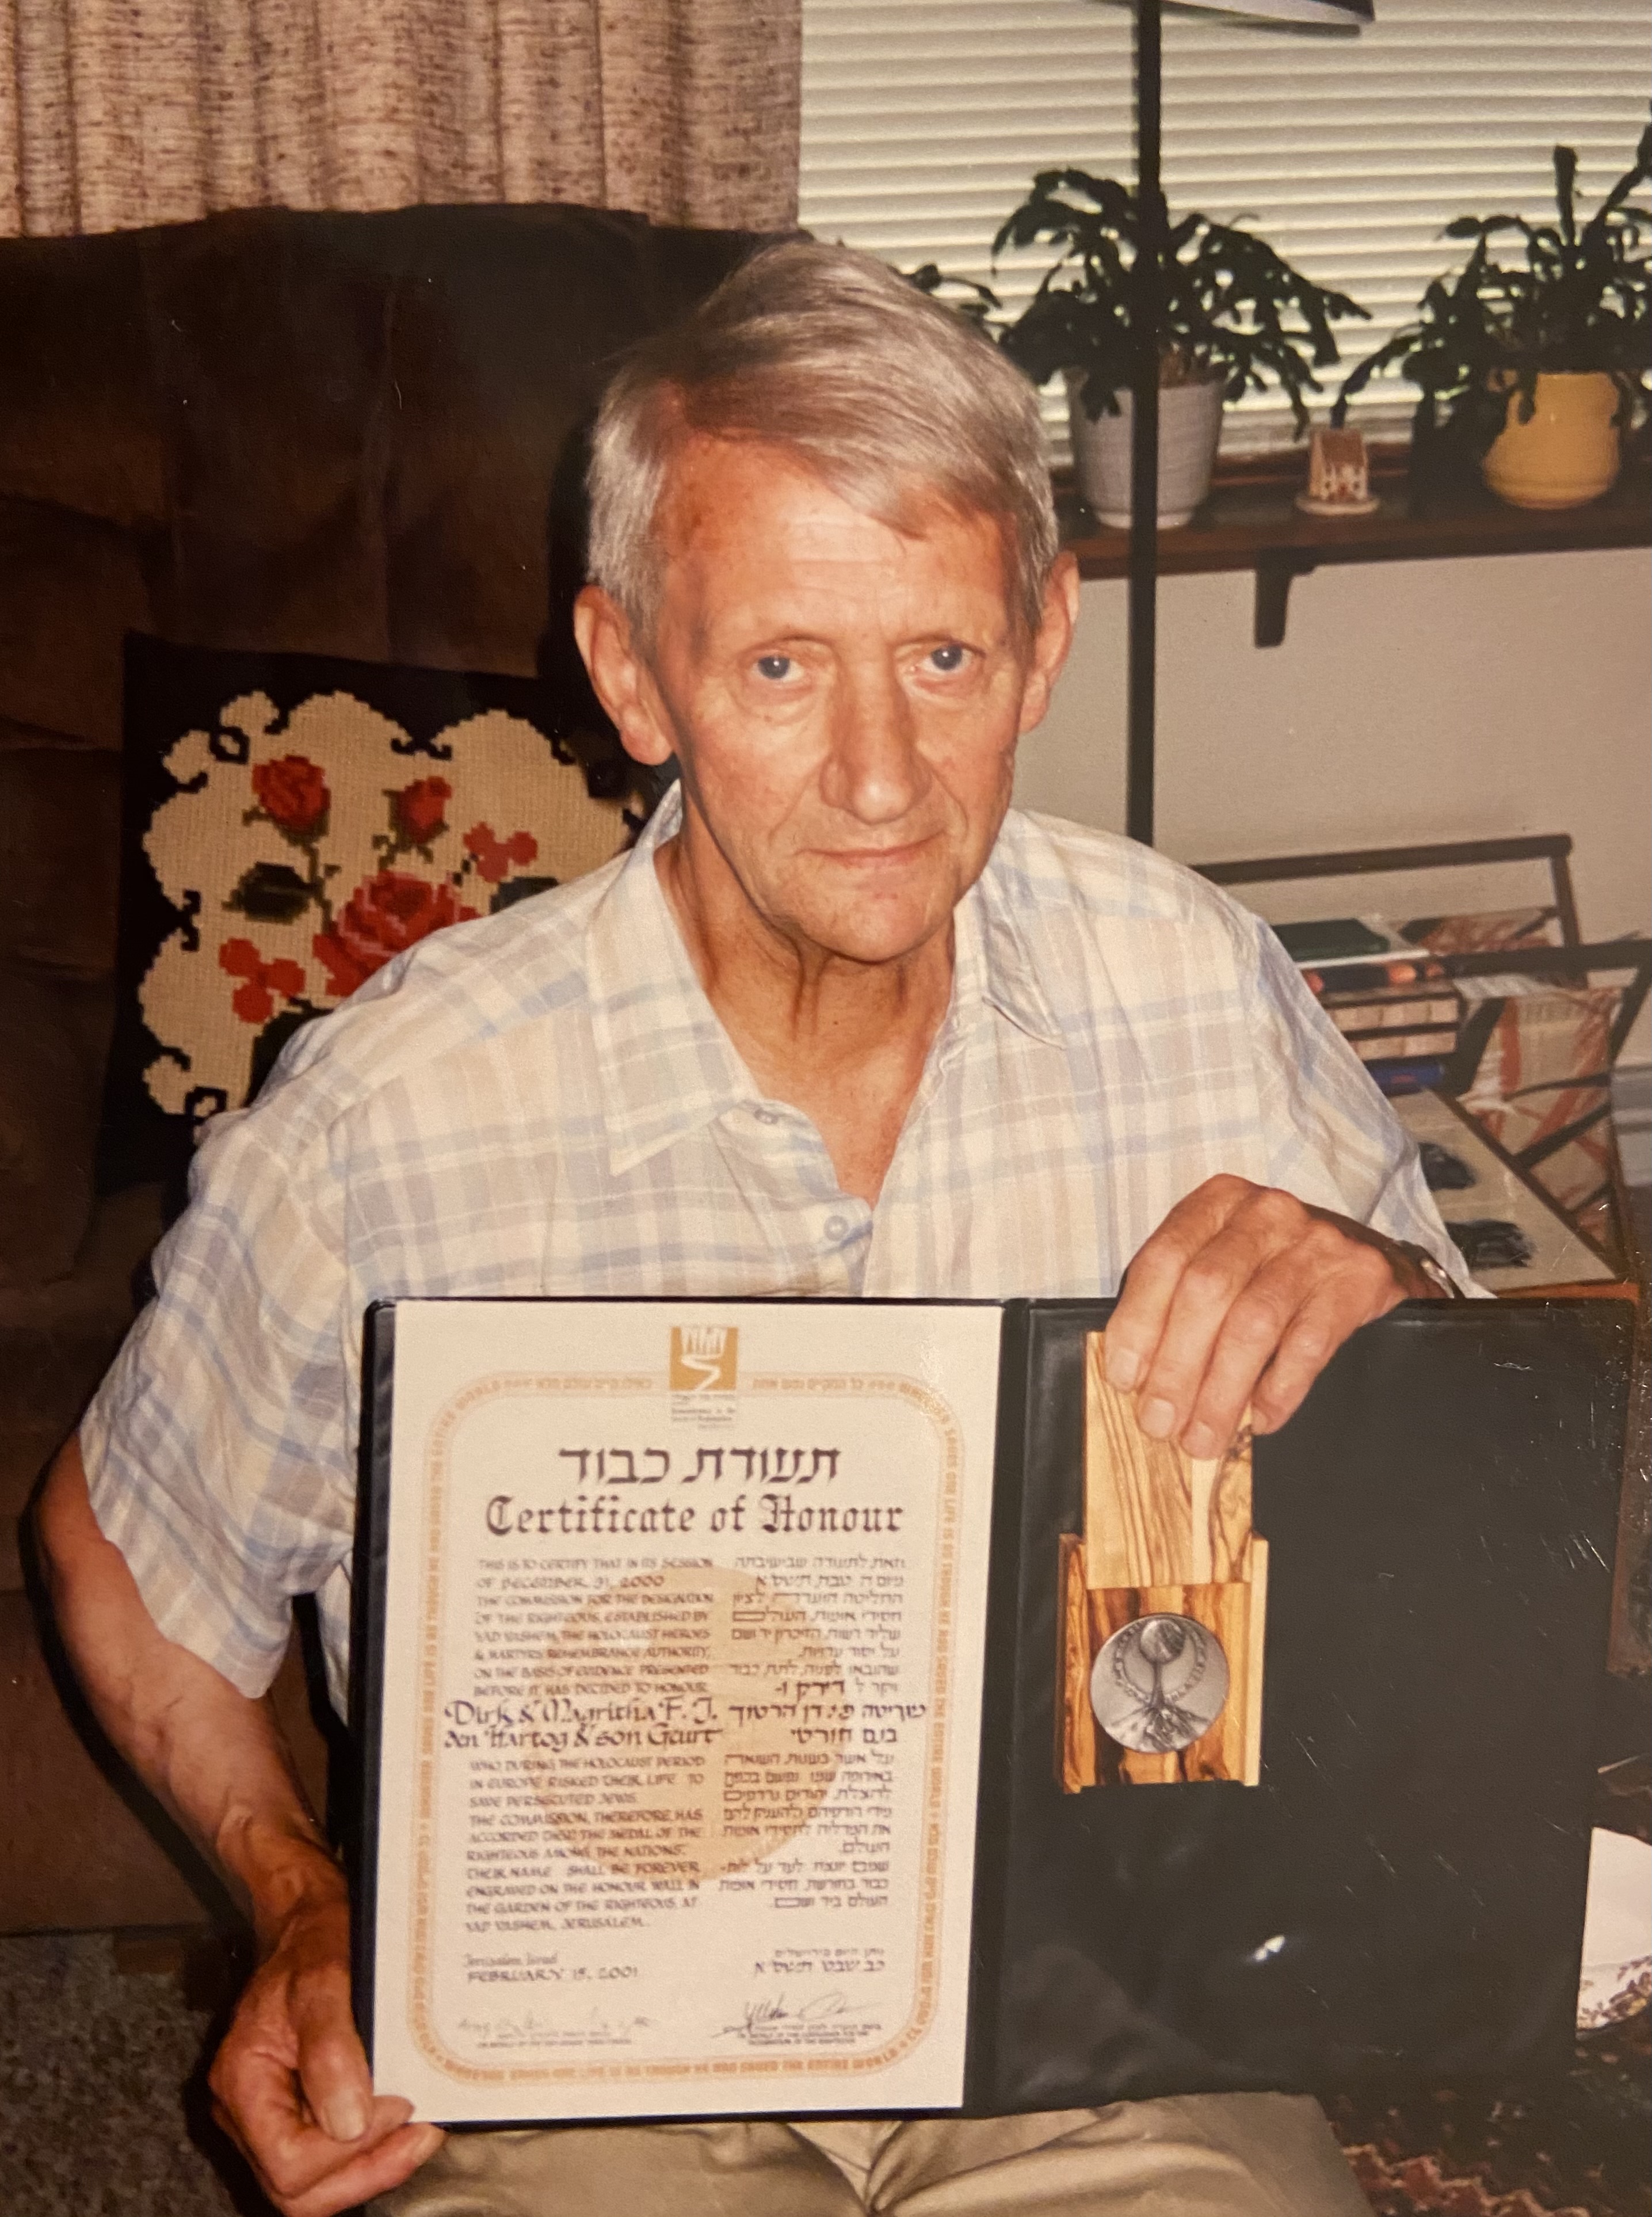 Nathan's den Hartog stepbrother, with the Yad Vashem certificate after receiving the Righteous Among the Nations. The award ceremony was held in Philadelphia.